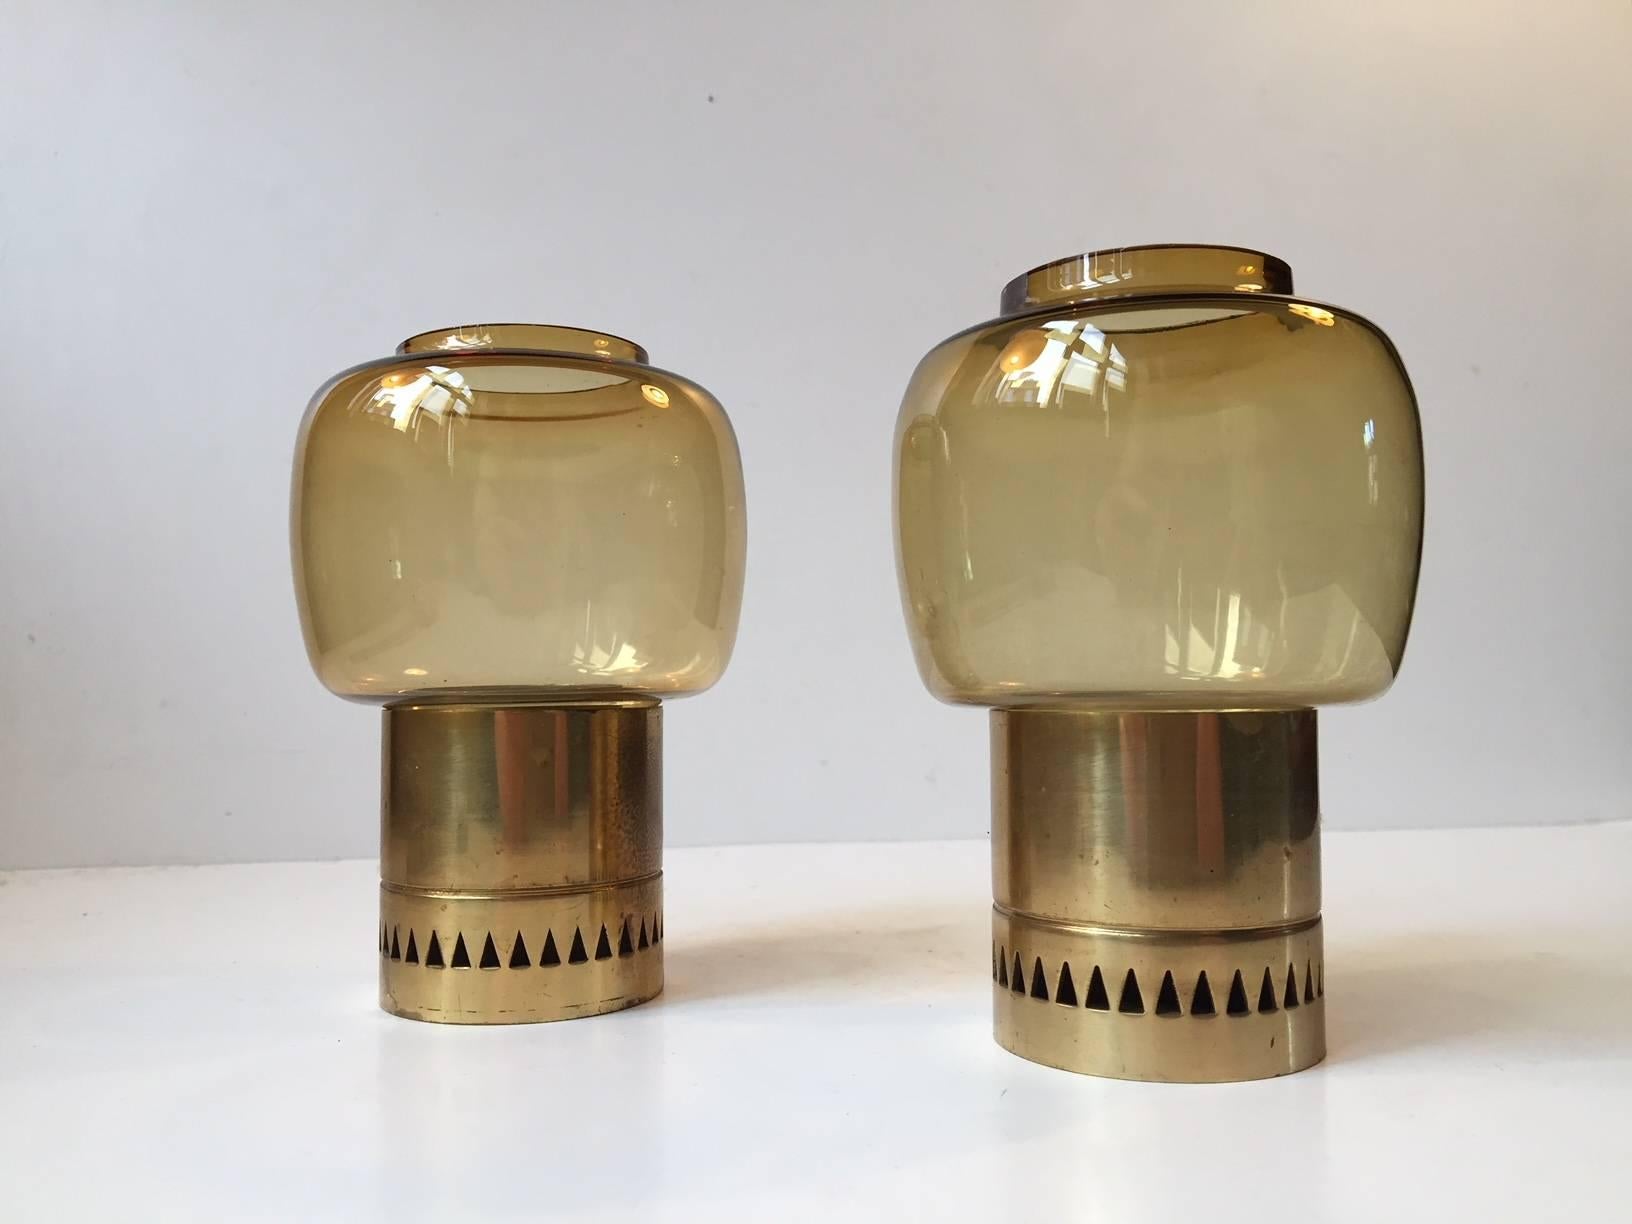 This matching pair of tea light candleholders in honey-colored smoke glass and partially perforated brass were designed by Hans-Agne Jakobsson and manufactured by Markaryd AB in Sweden during the 1960s.